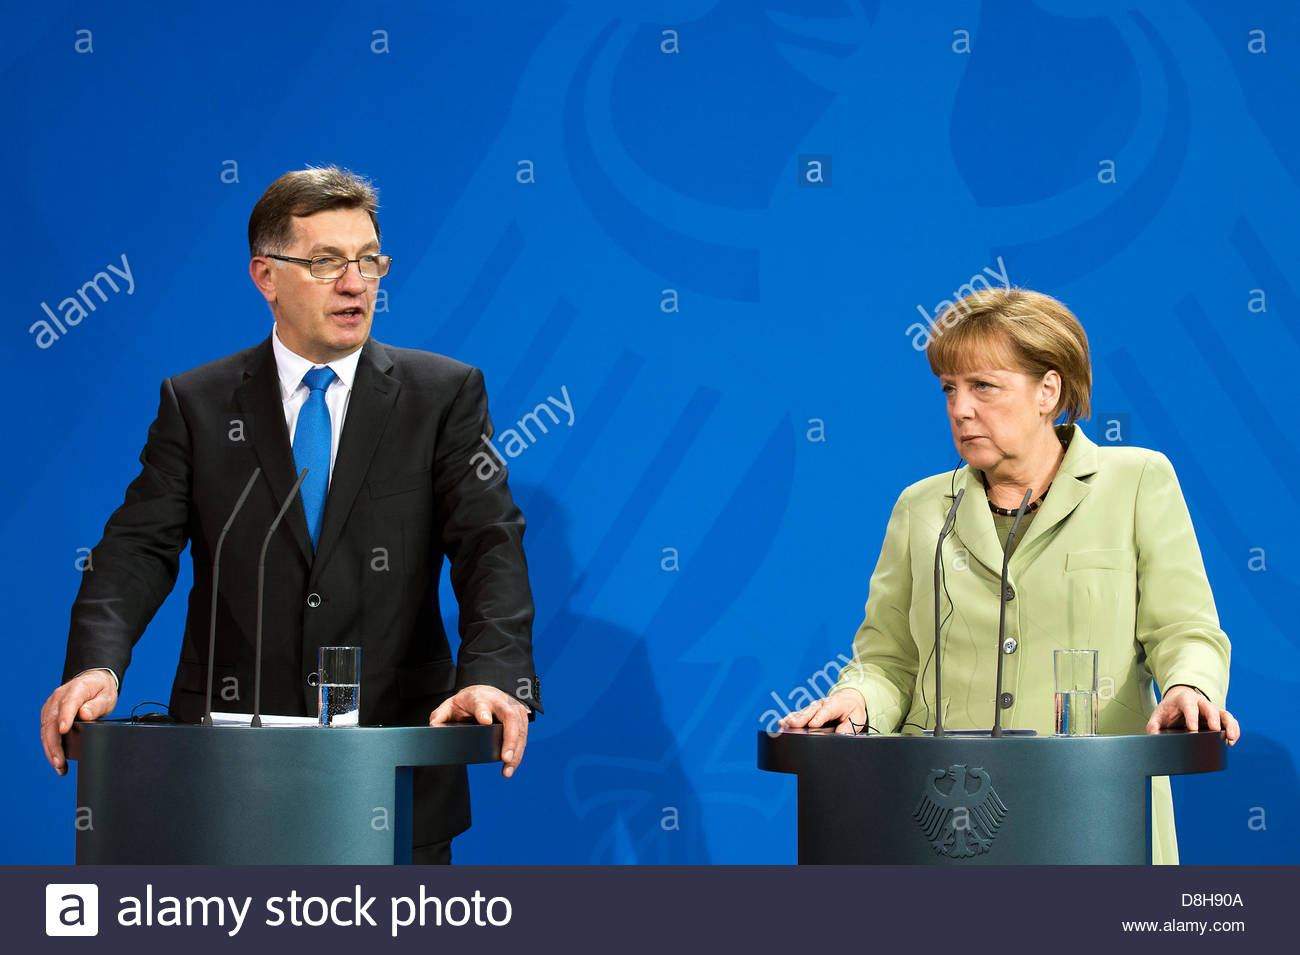 berlin-germany-29th-may-2013-press-conference-under-the-direction-D8H90A.jpg